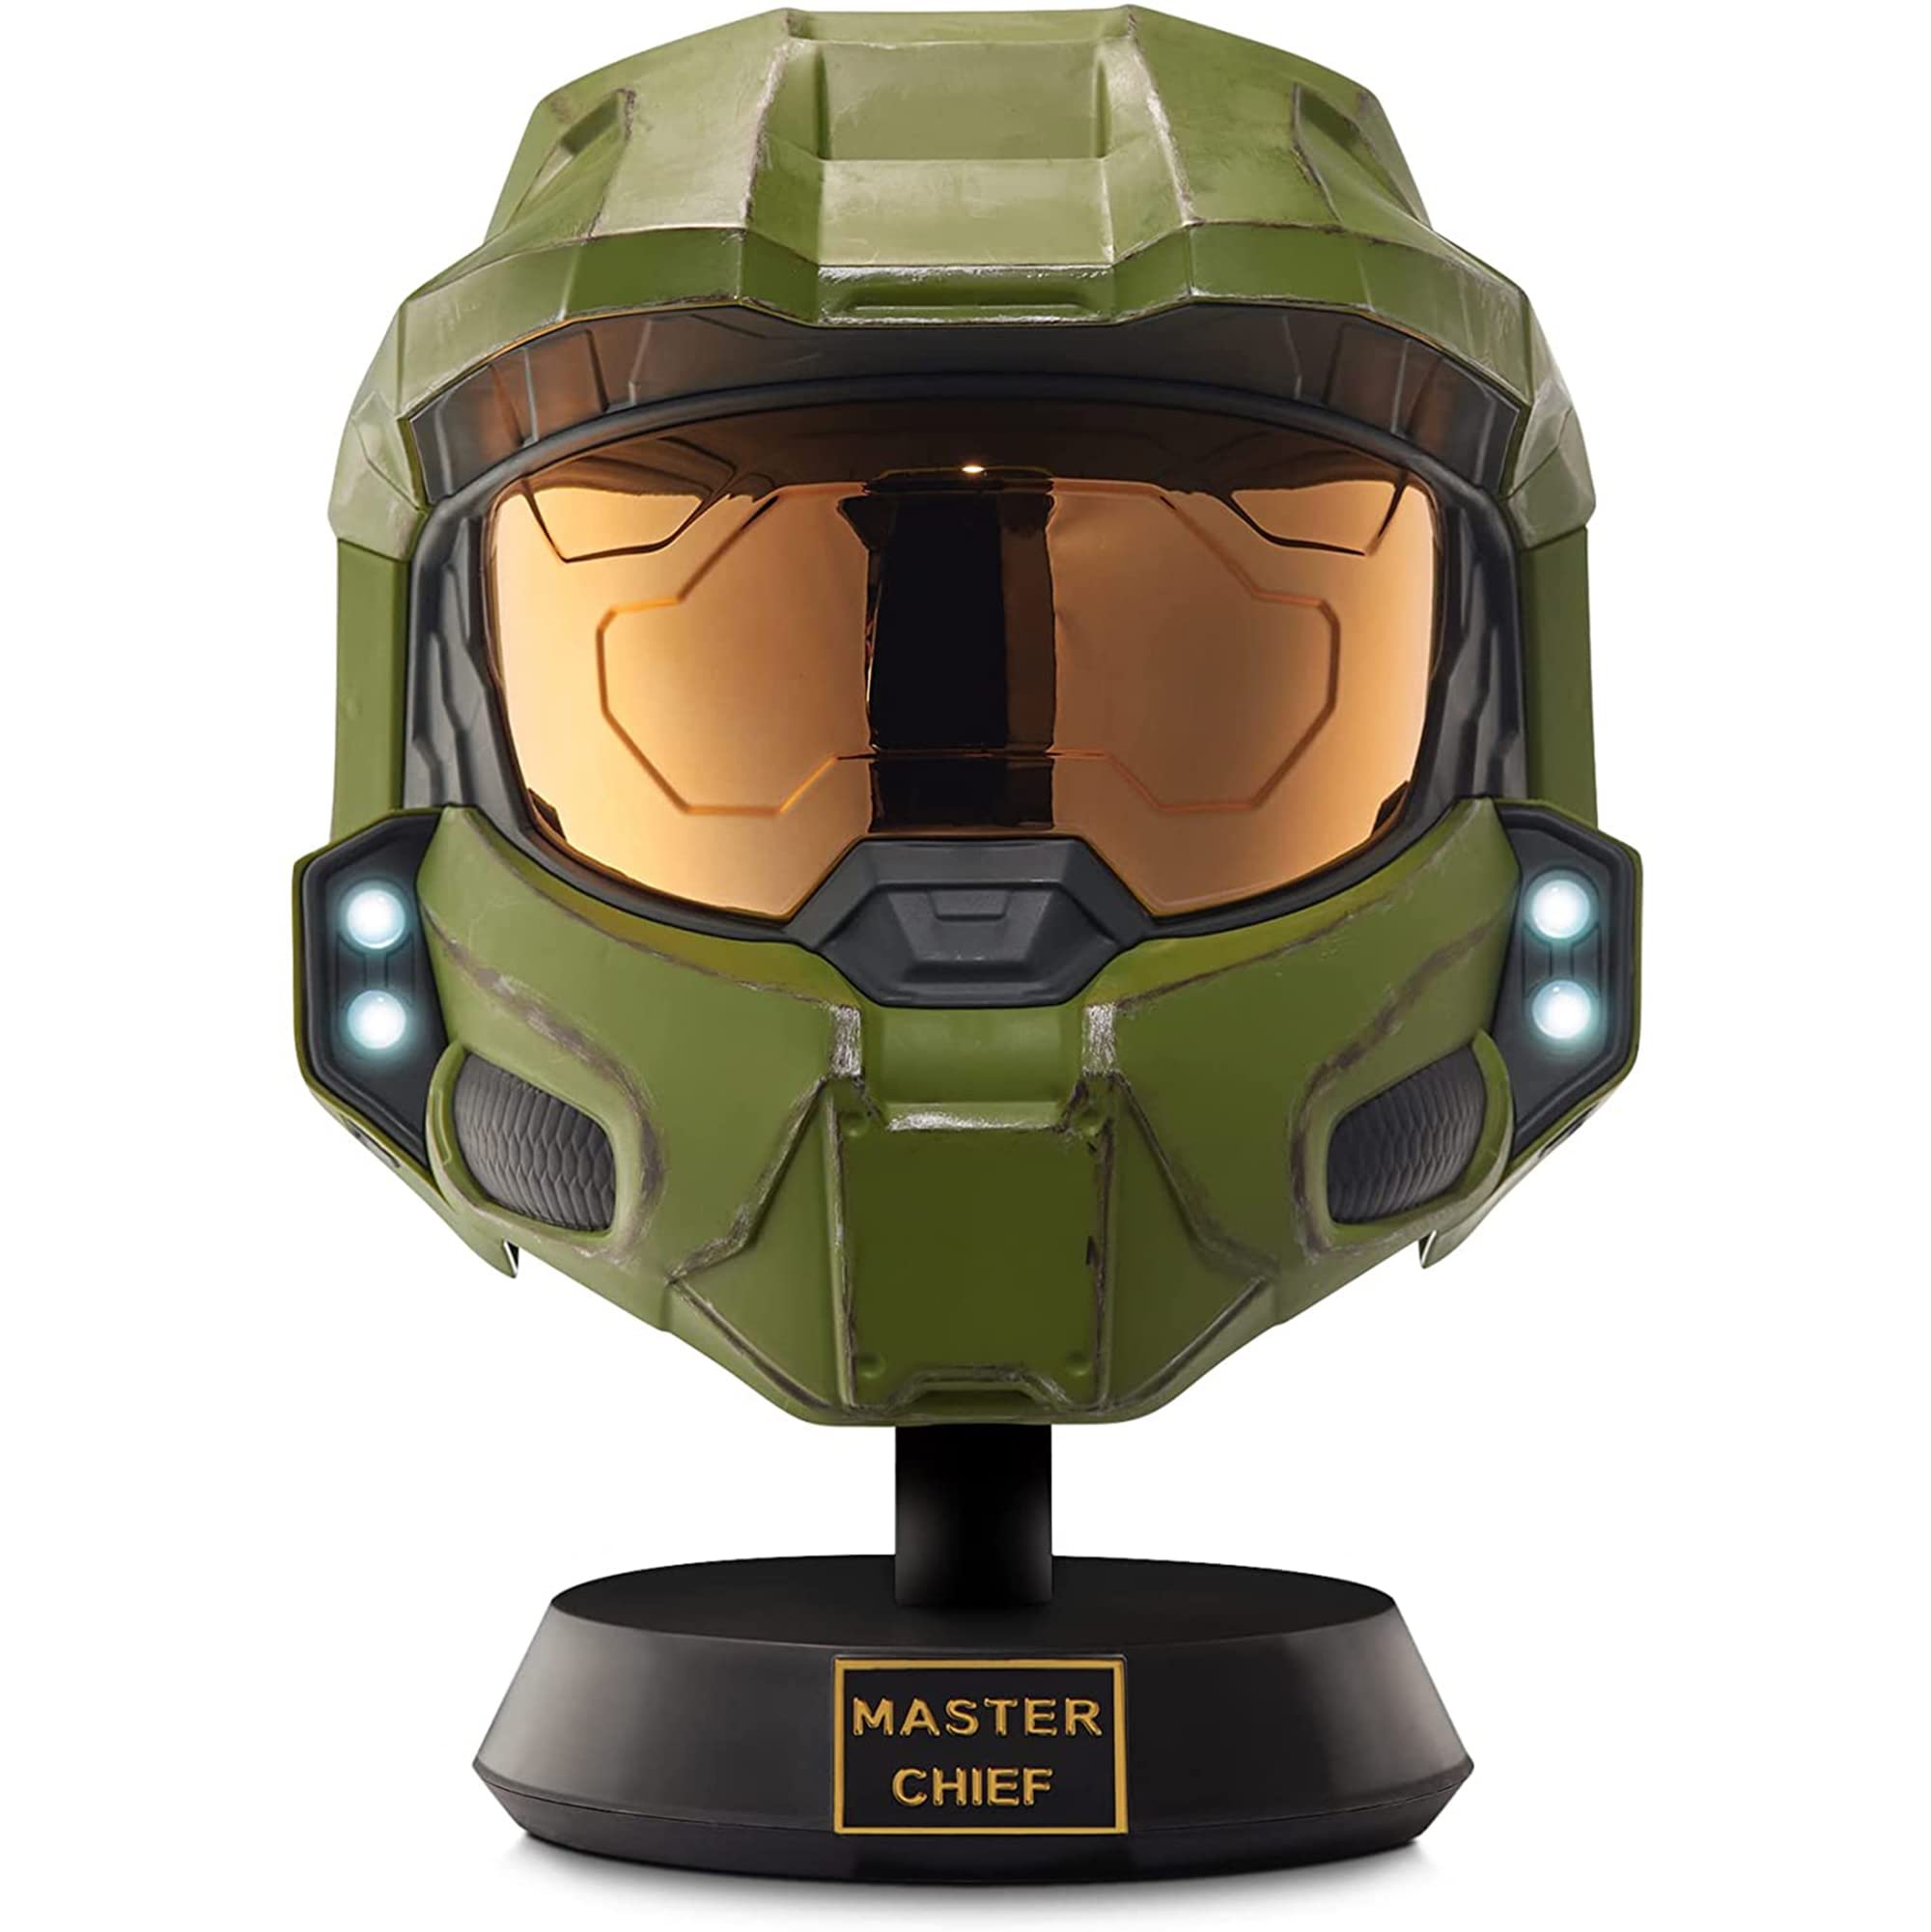 Halo Master Chief Deluxe Helmet with Stand - LED Lights on Each Side - Battle Damaged Paint - One Size Fits Most – No Sounds or SFX $59.98